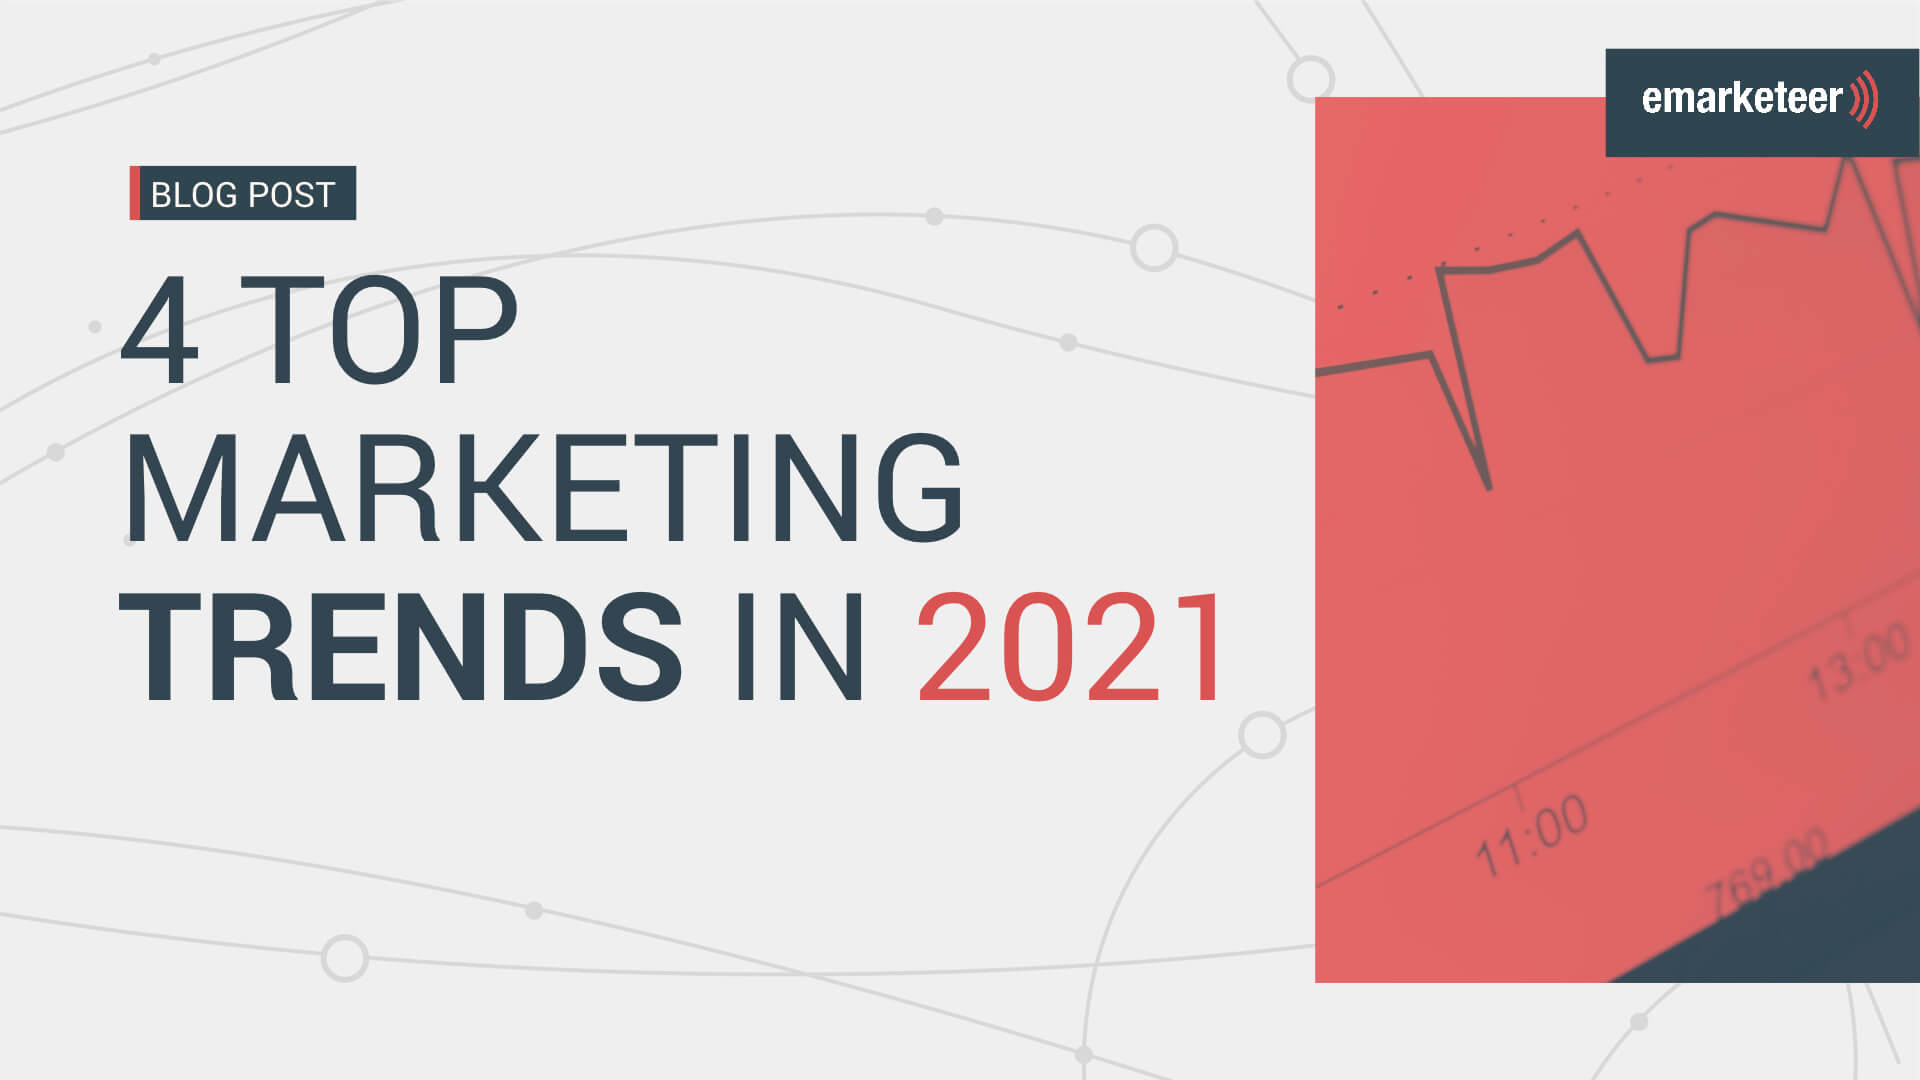 Title wthat says "four marketing trends in 2021" along with an image of a graph in the color red.